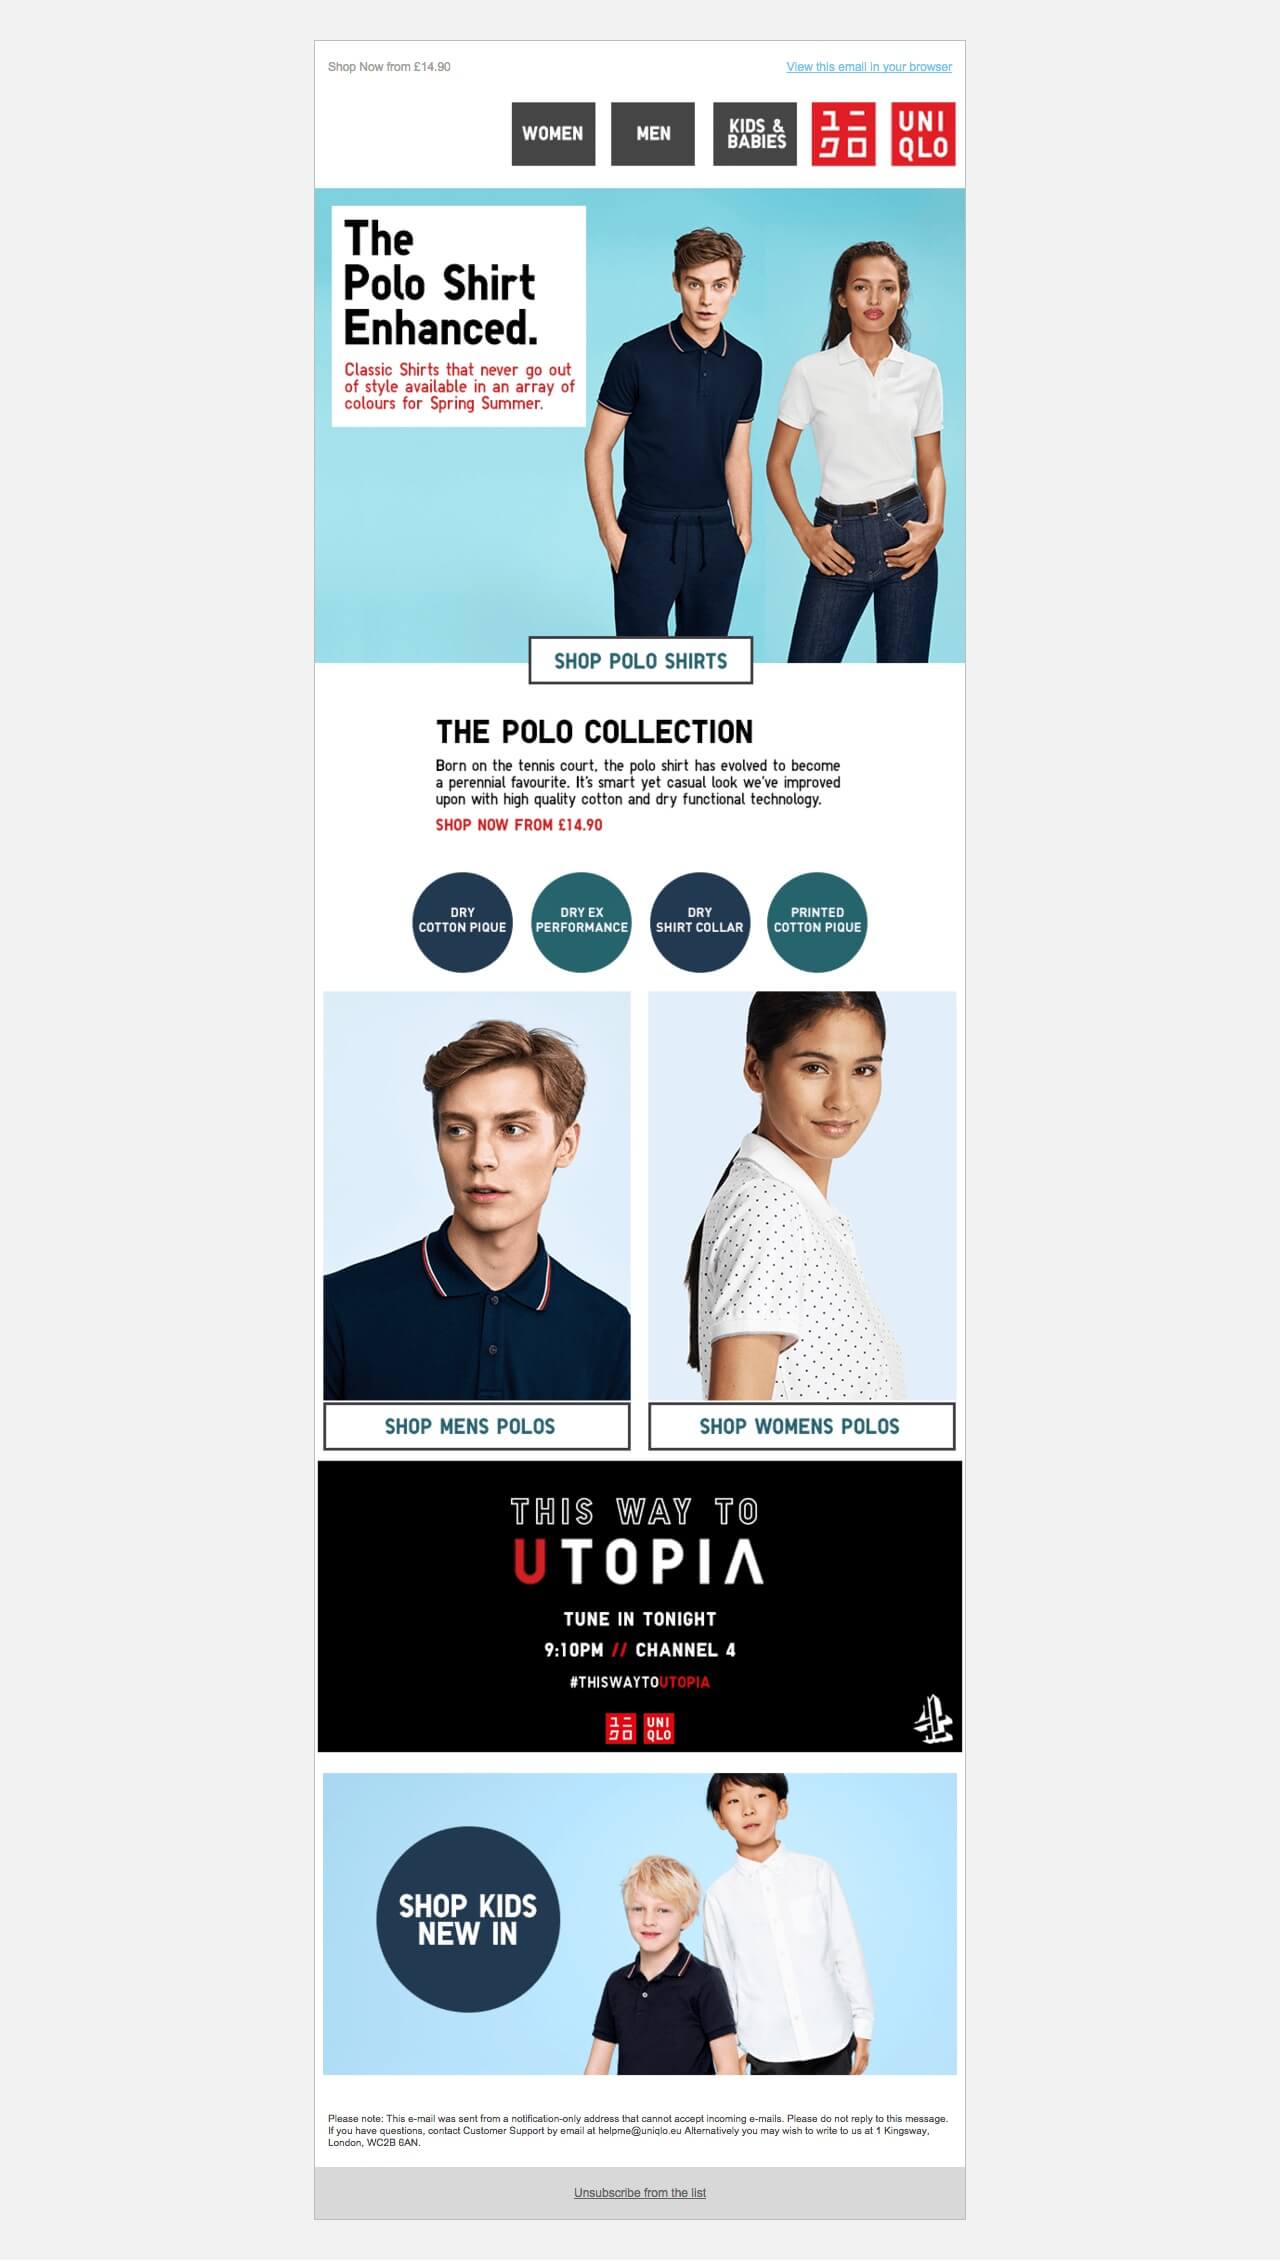 UNIQLO's email marketing strategy 